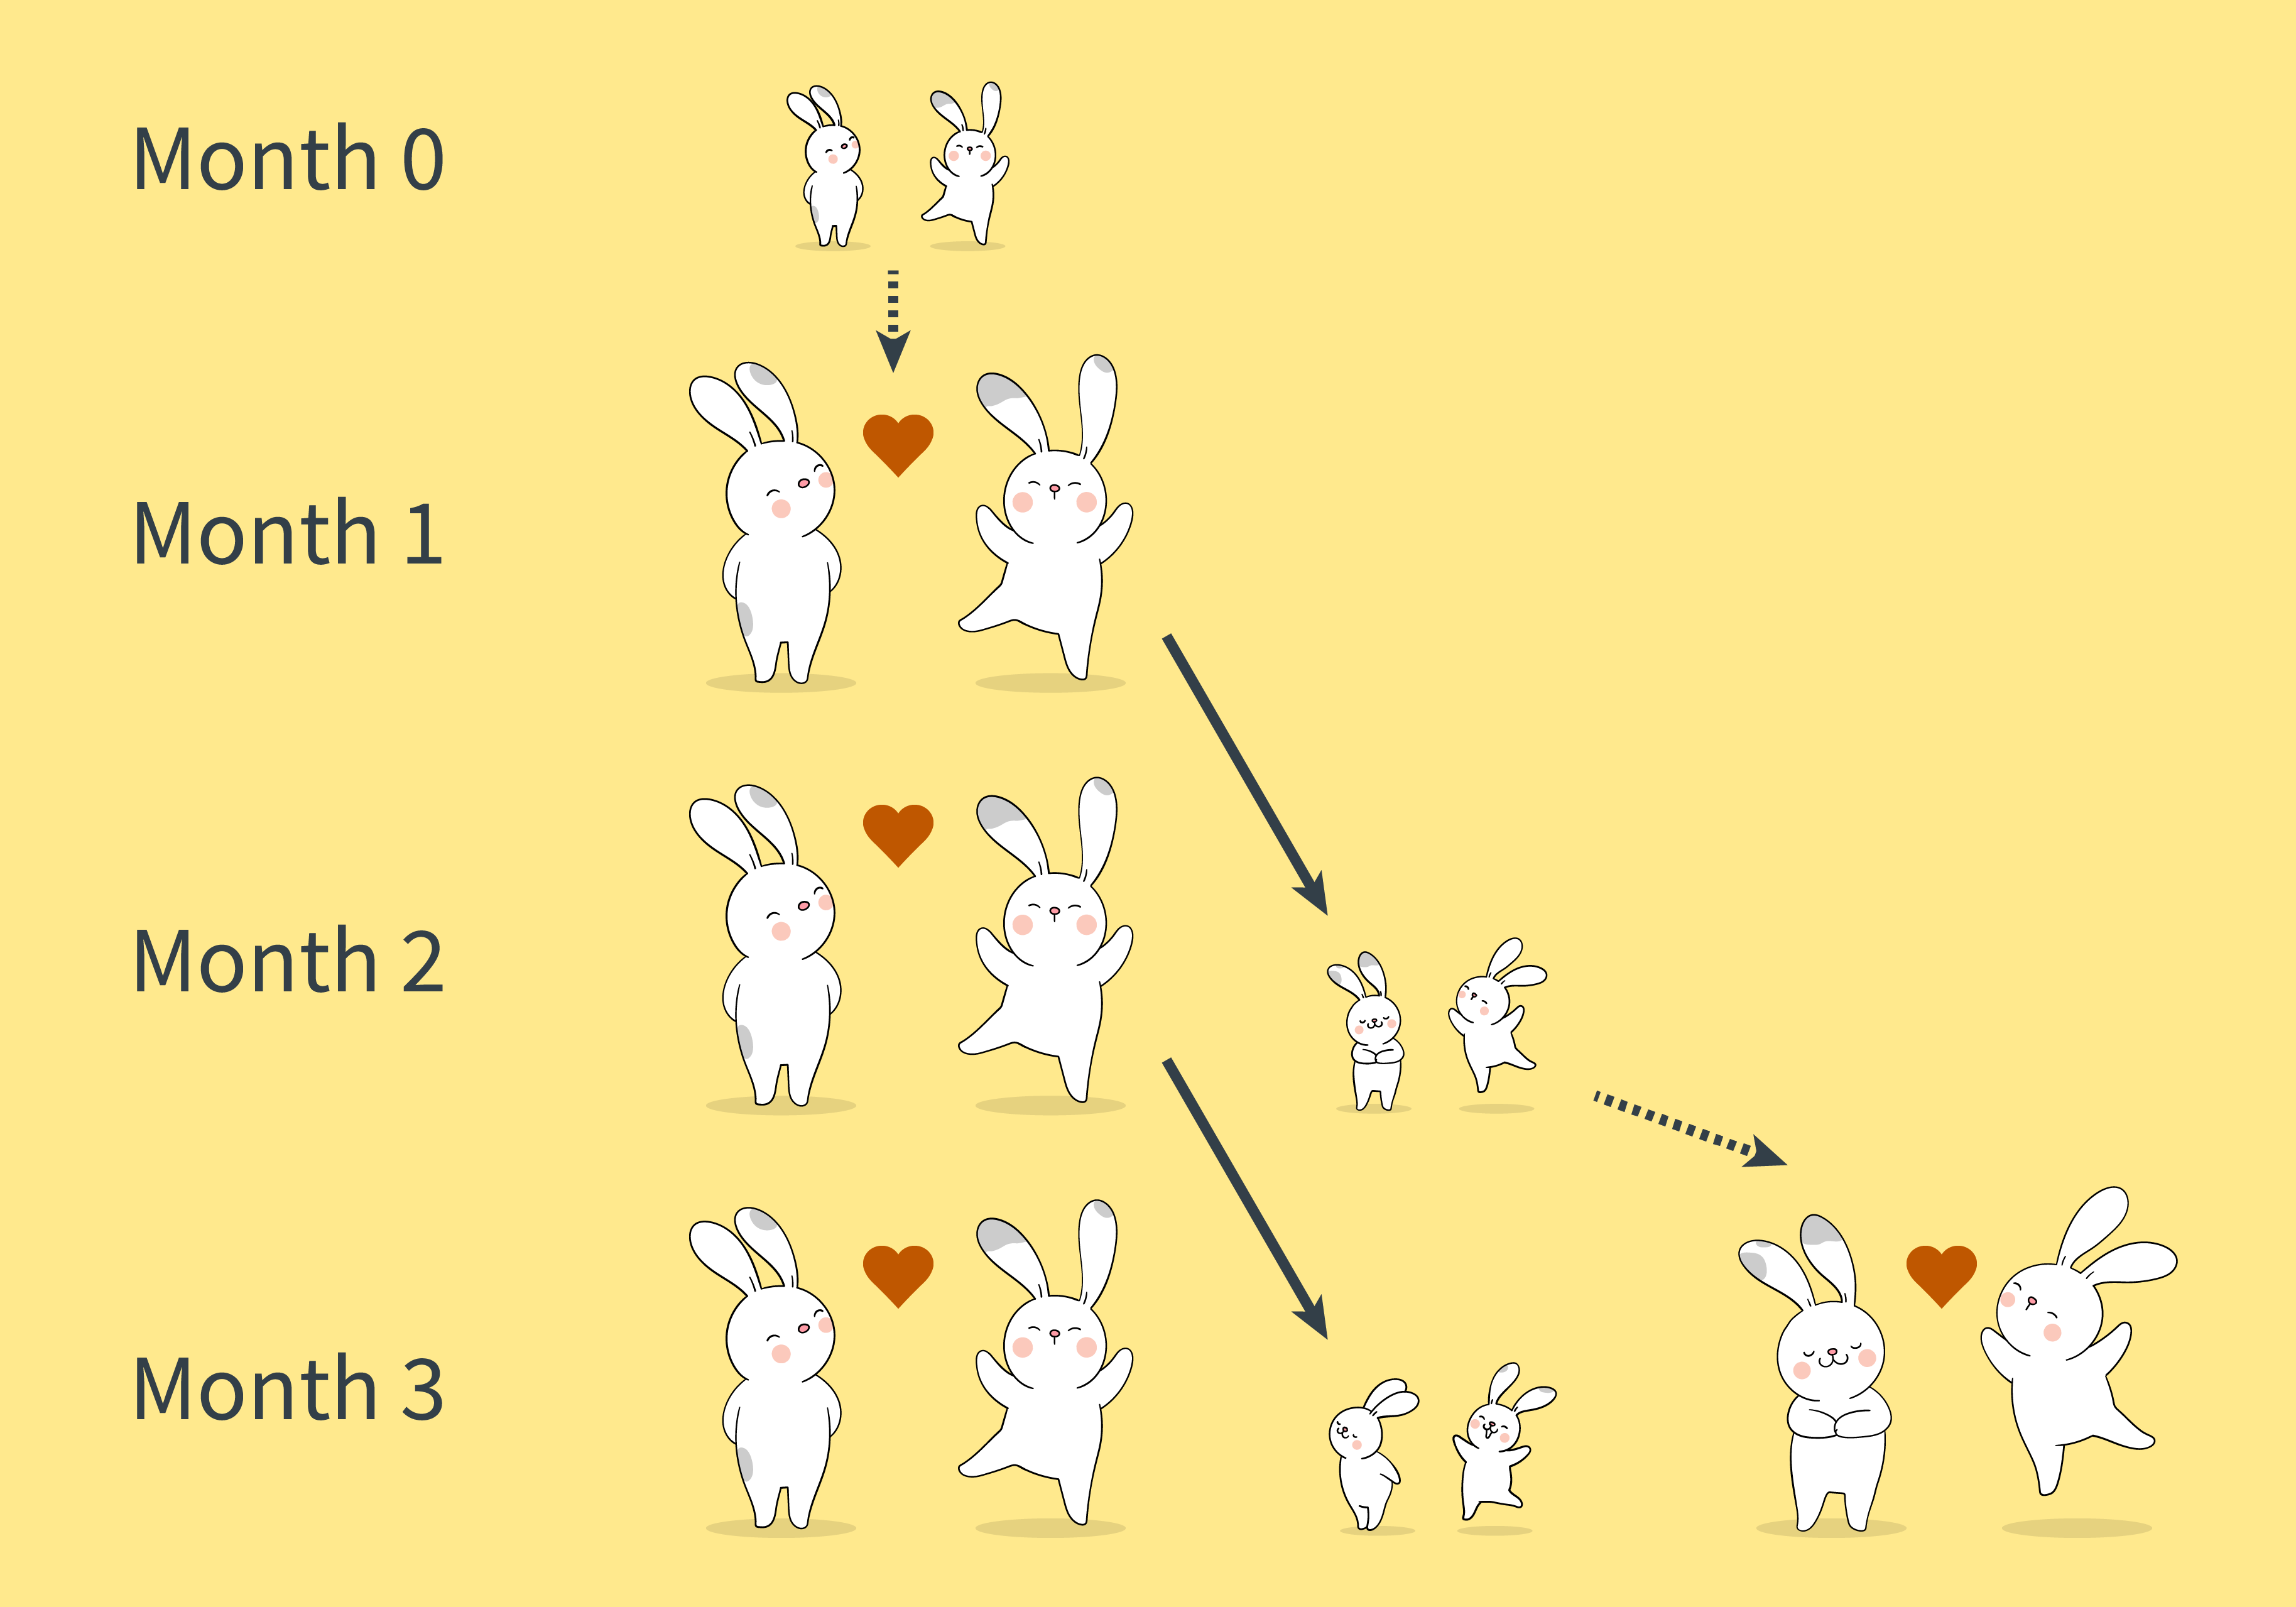 Four row table showing one pair baby rabbits in month 0, one pair adult rabbits in month 1, one pair of adults and one pair babies in month 2, and two pairs adults and one pair babies in month 3